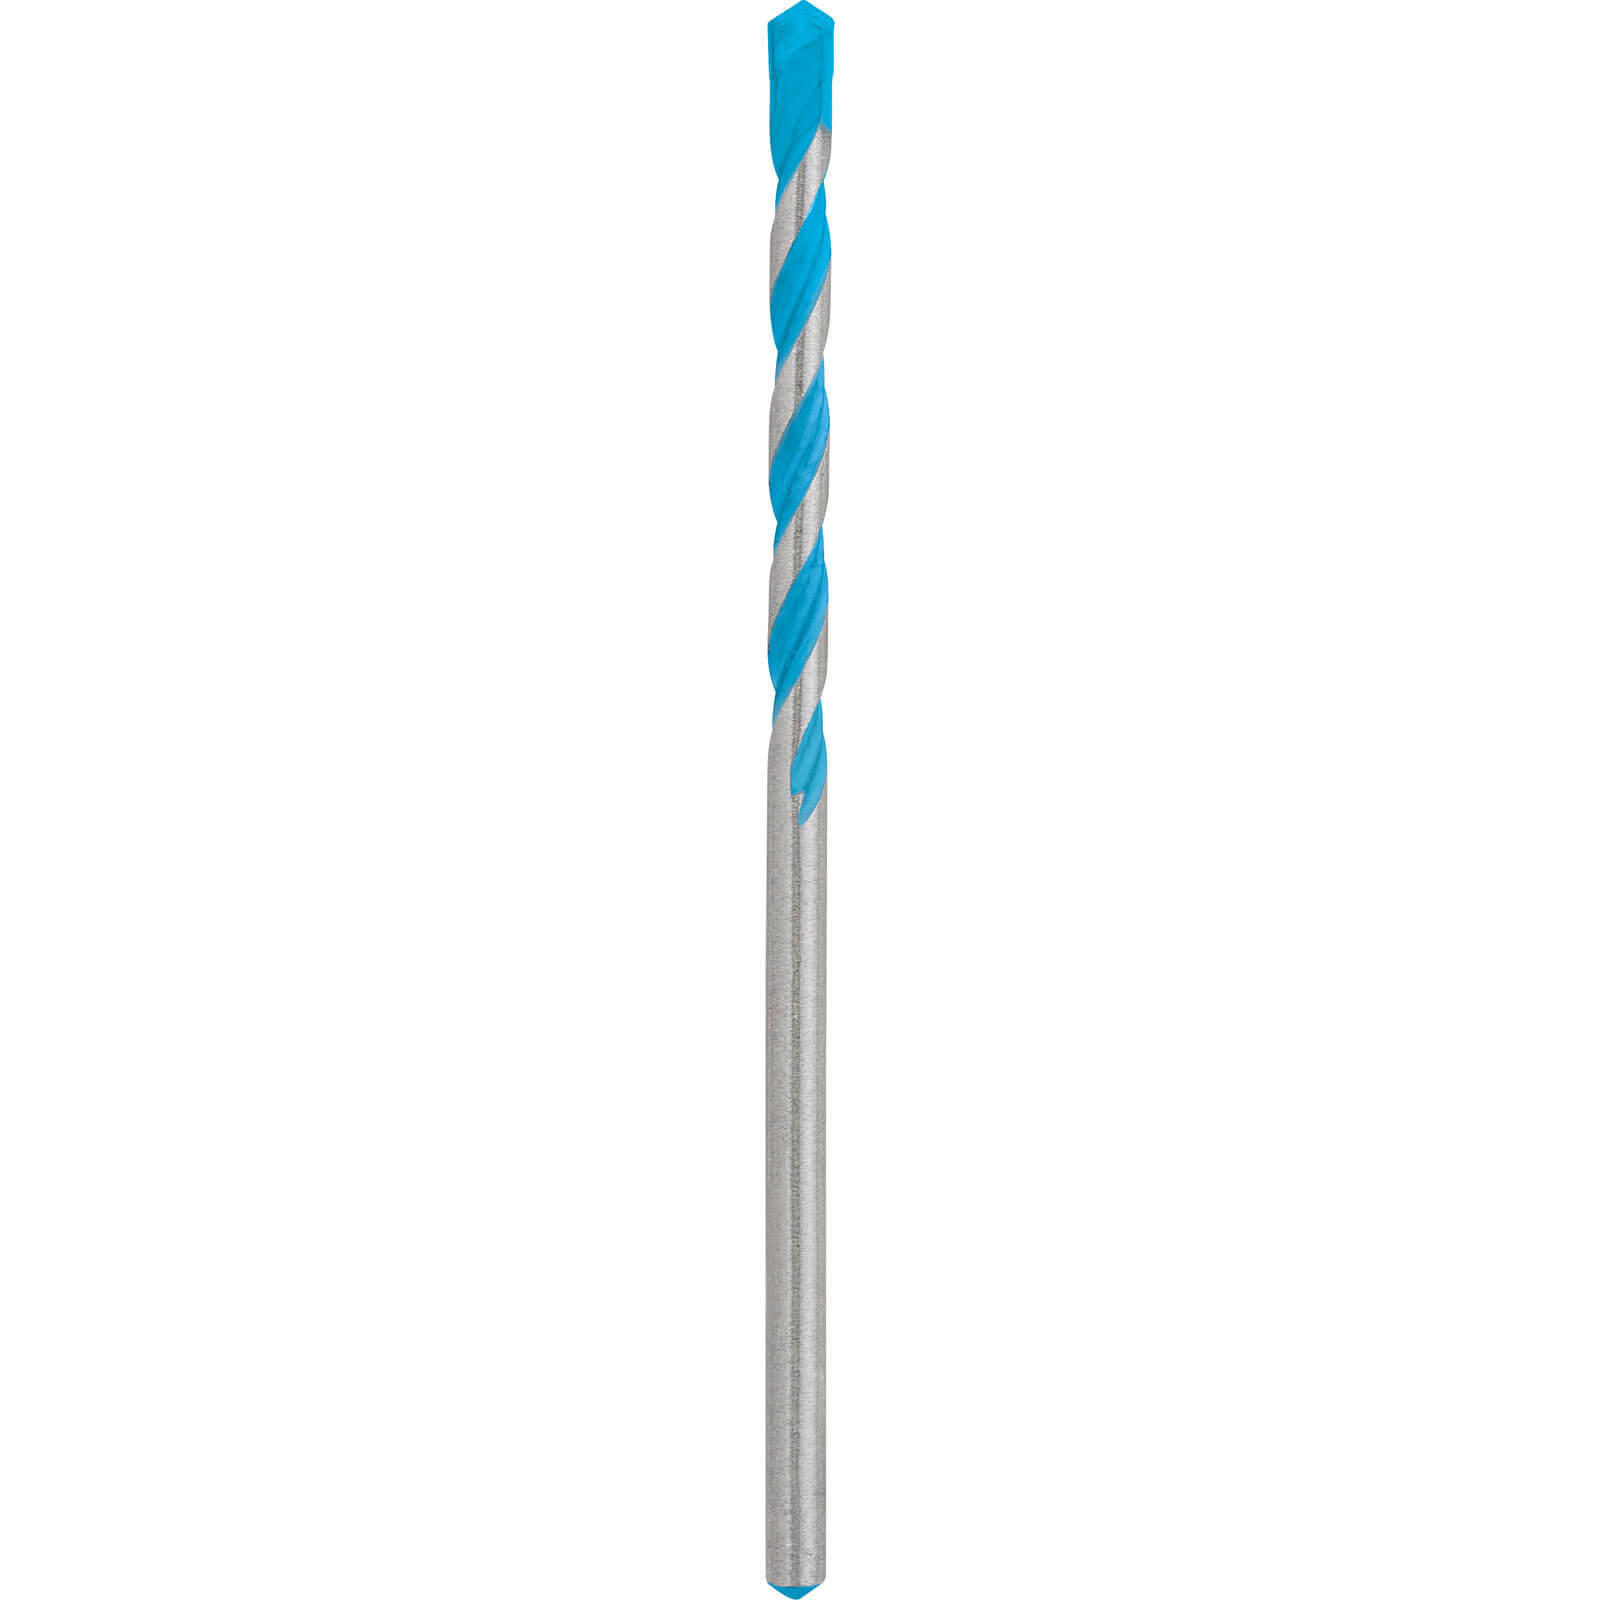 Photo of Bosch Expert Cyl-9 Multi Construction Drill Bit 7mm 250mm Pack Of 1